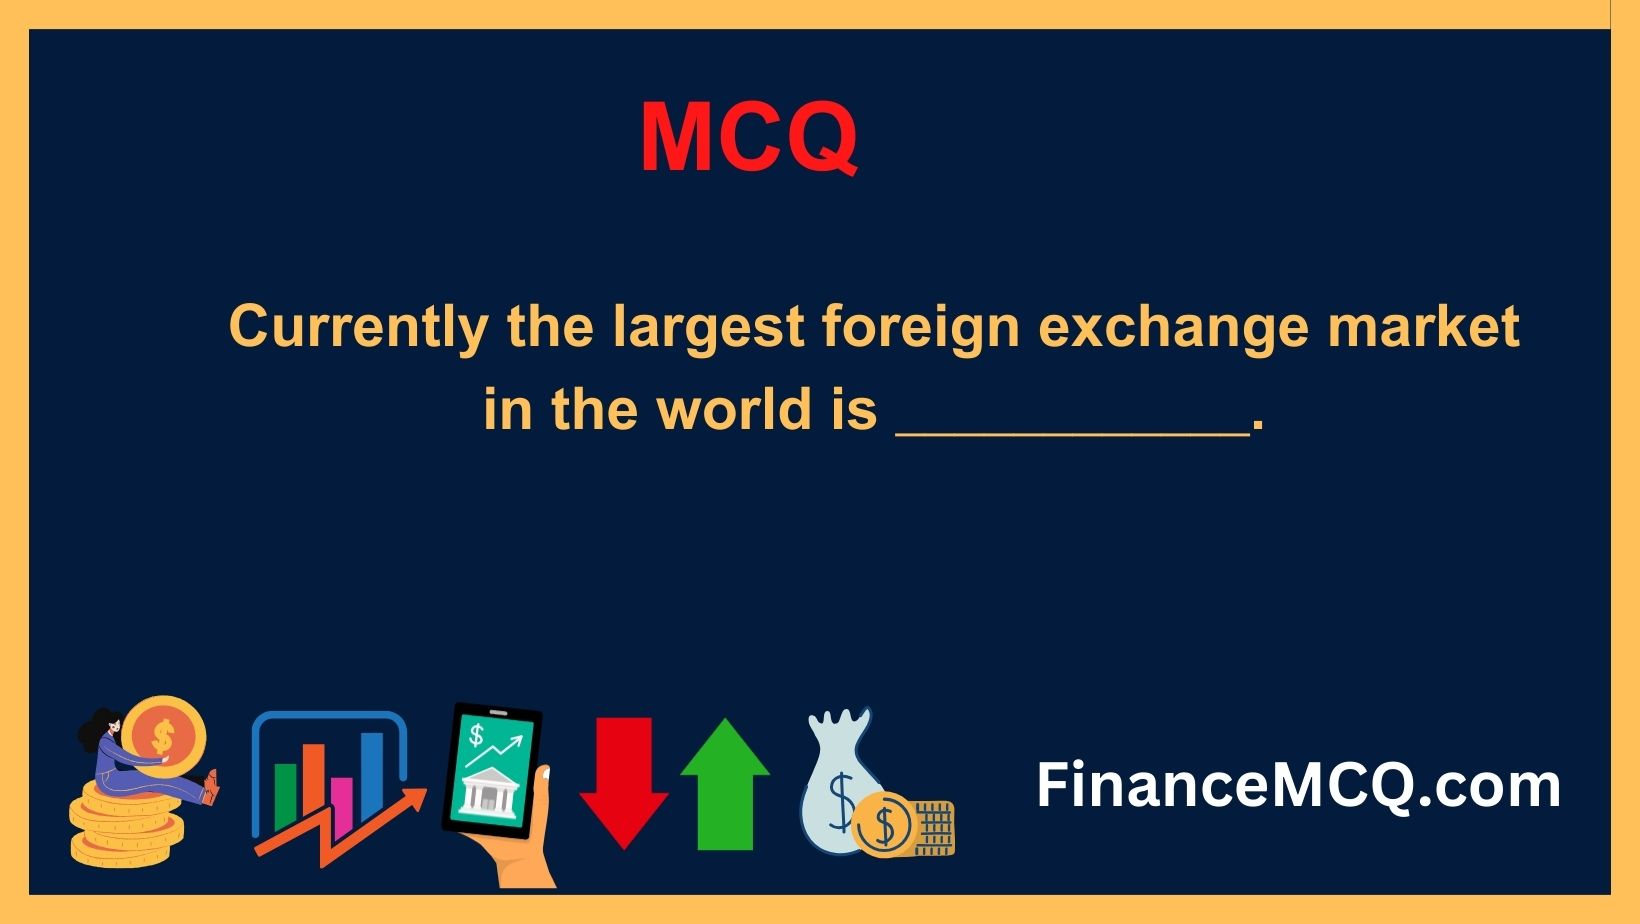 Currently the largest foreign exchange market in the world is ____________.